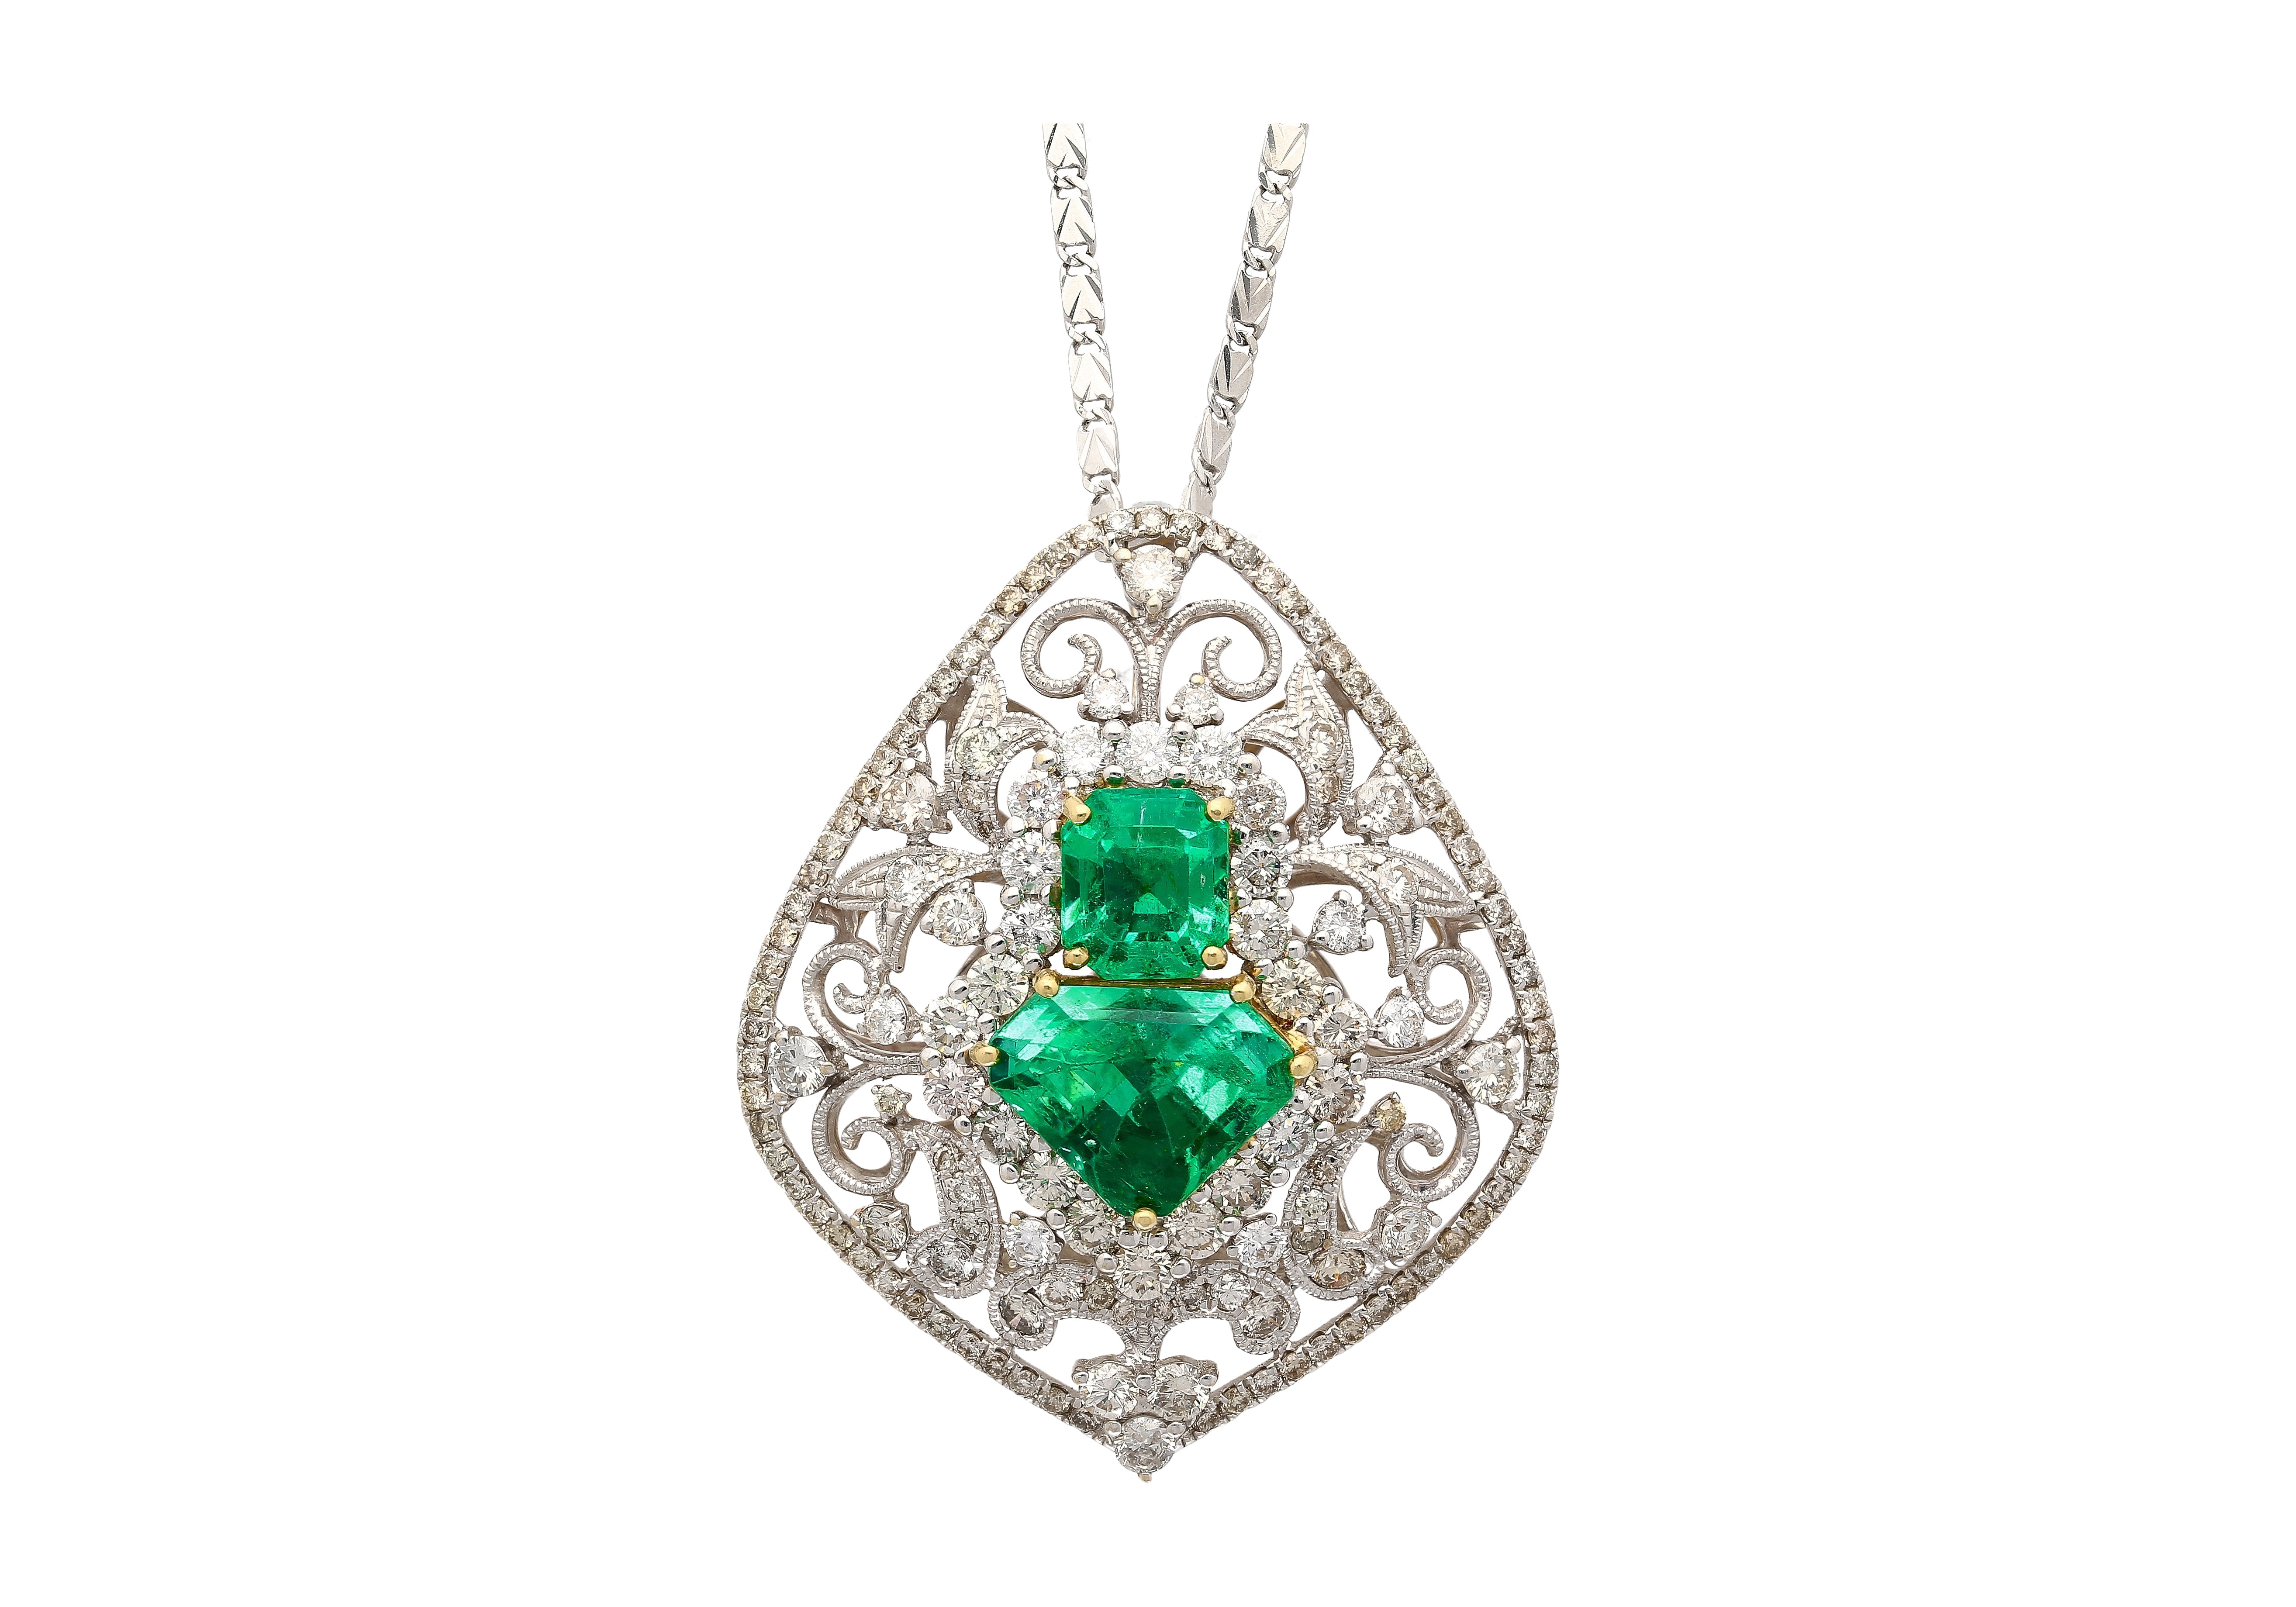 Vintage-Art-Nouveau-Style-Carved-18K-White-Gold-Pendant-Necklace-With-Shield-Cut-Emerald-and-Diamond-Side-Stones-Necklace.jpg